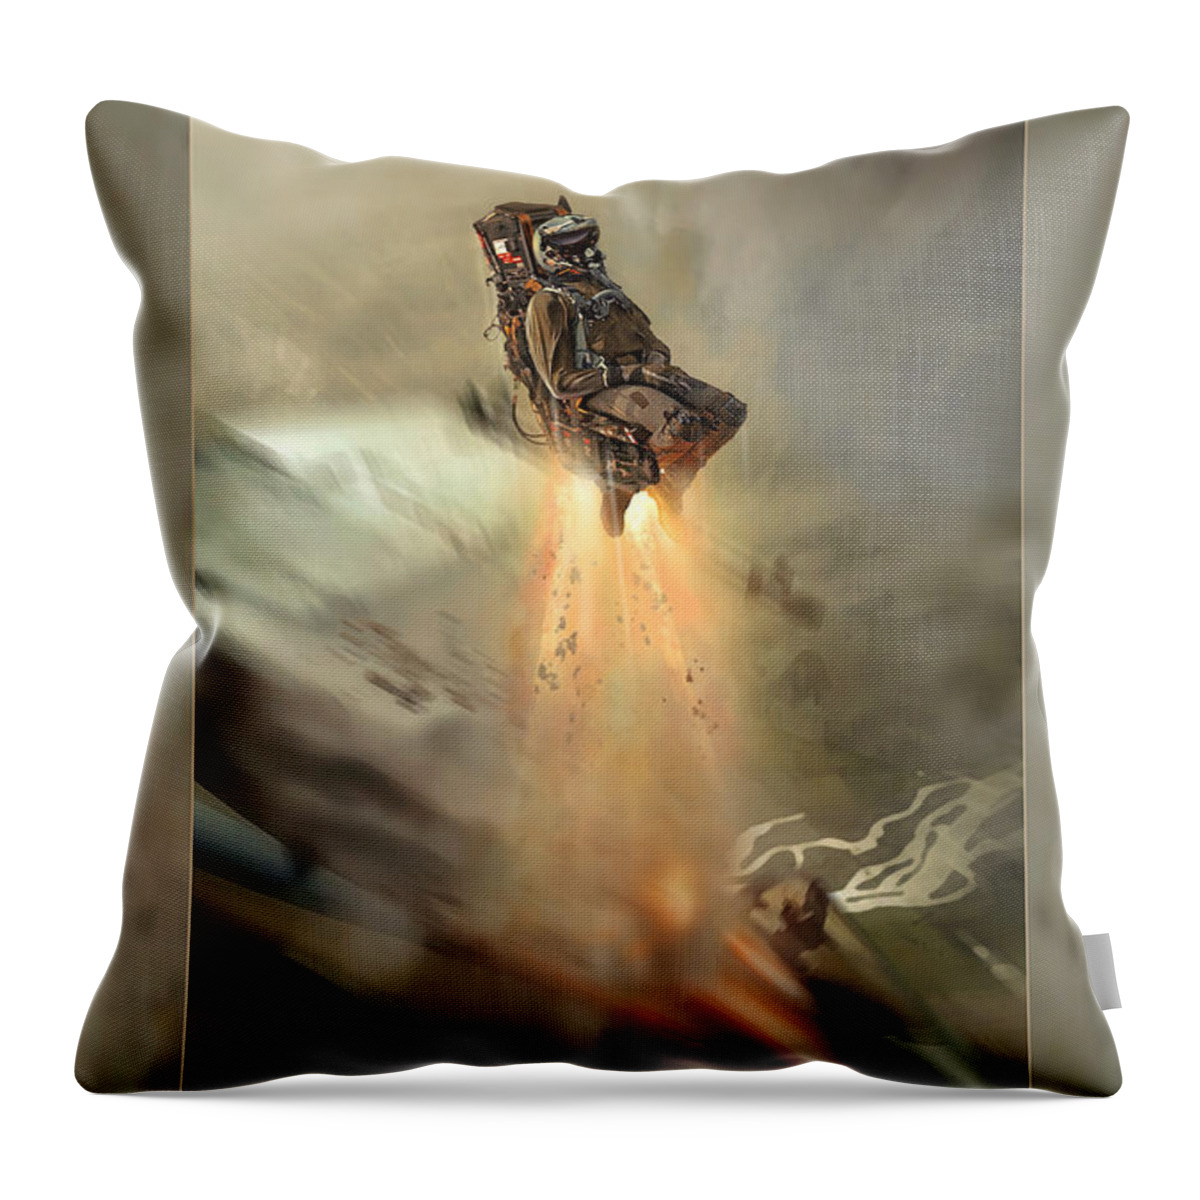 War Throw Pillow featuring the digital art Eject Eject Eject by Peter Van Stigt